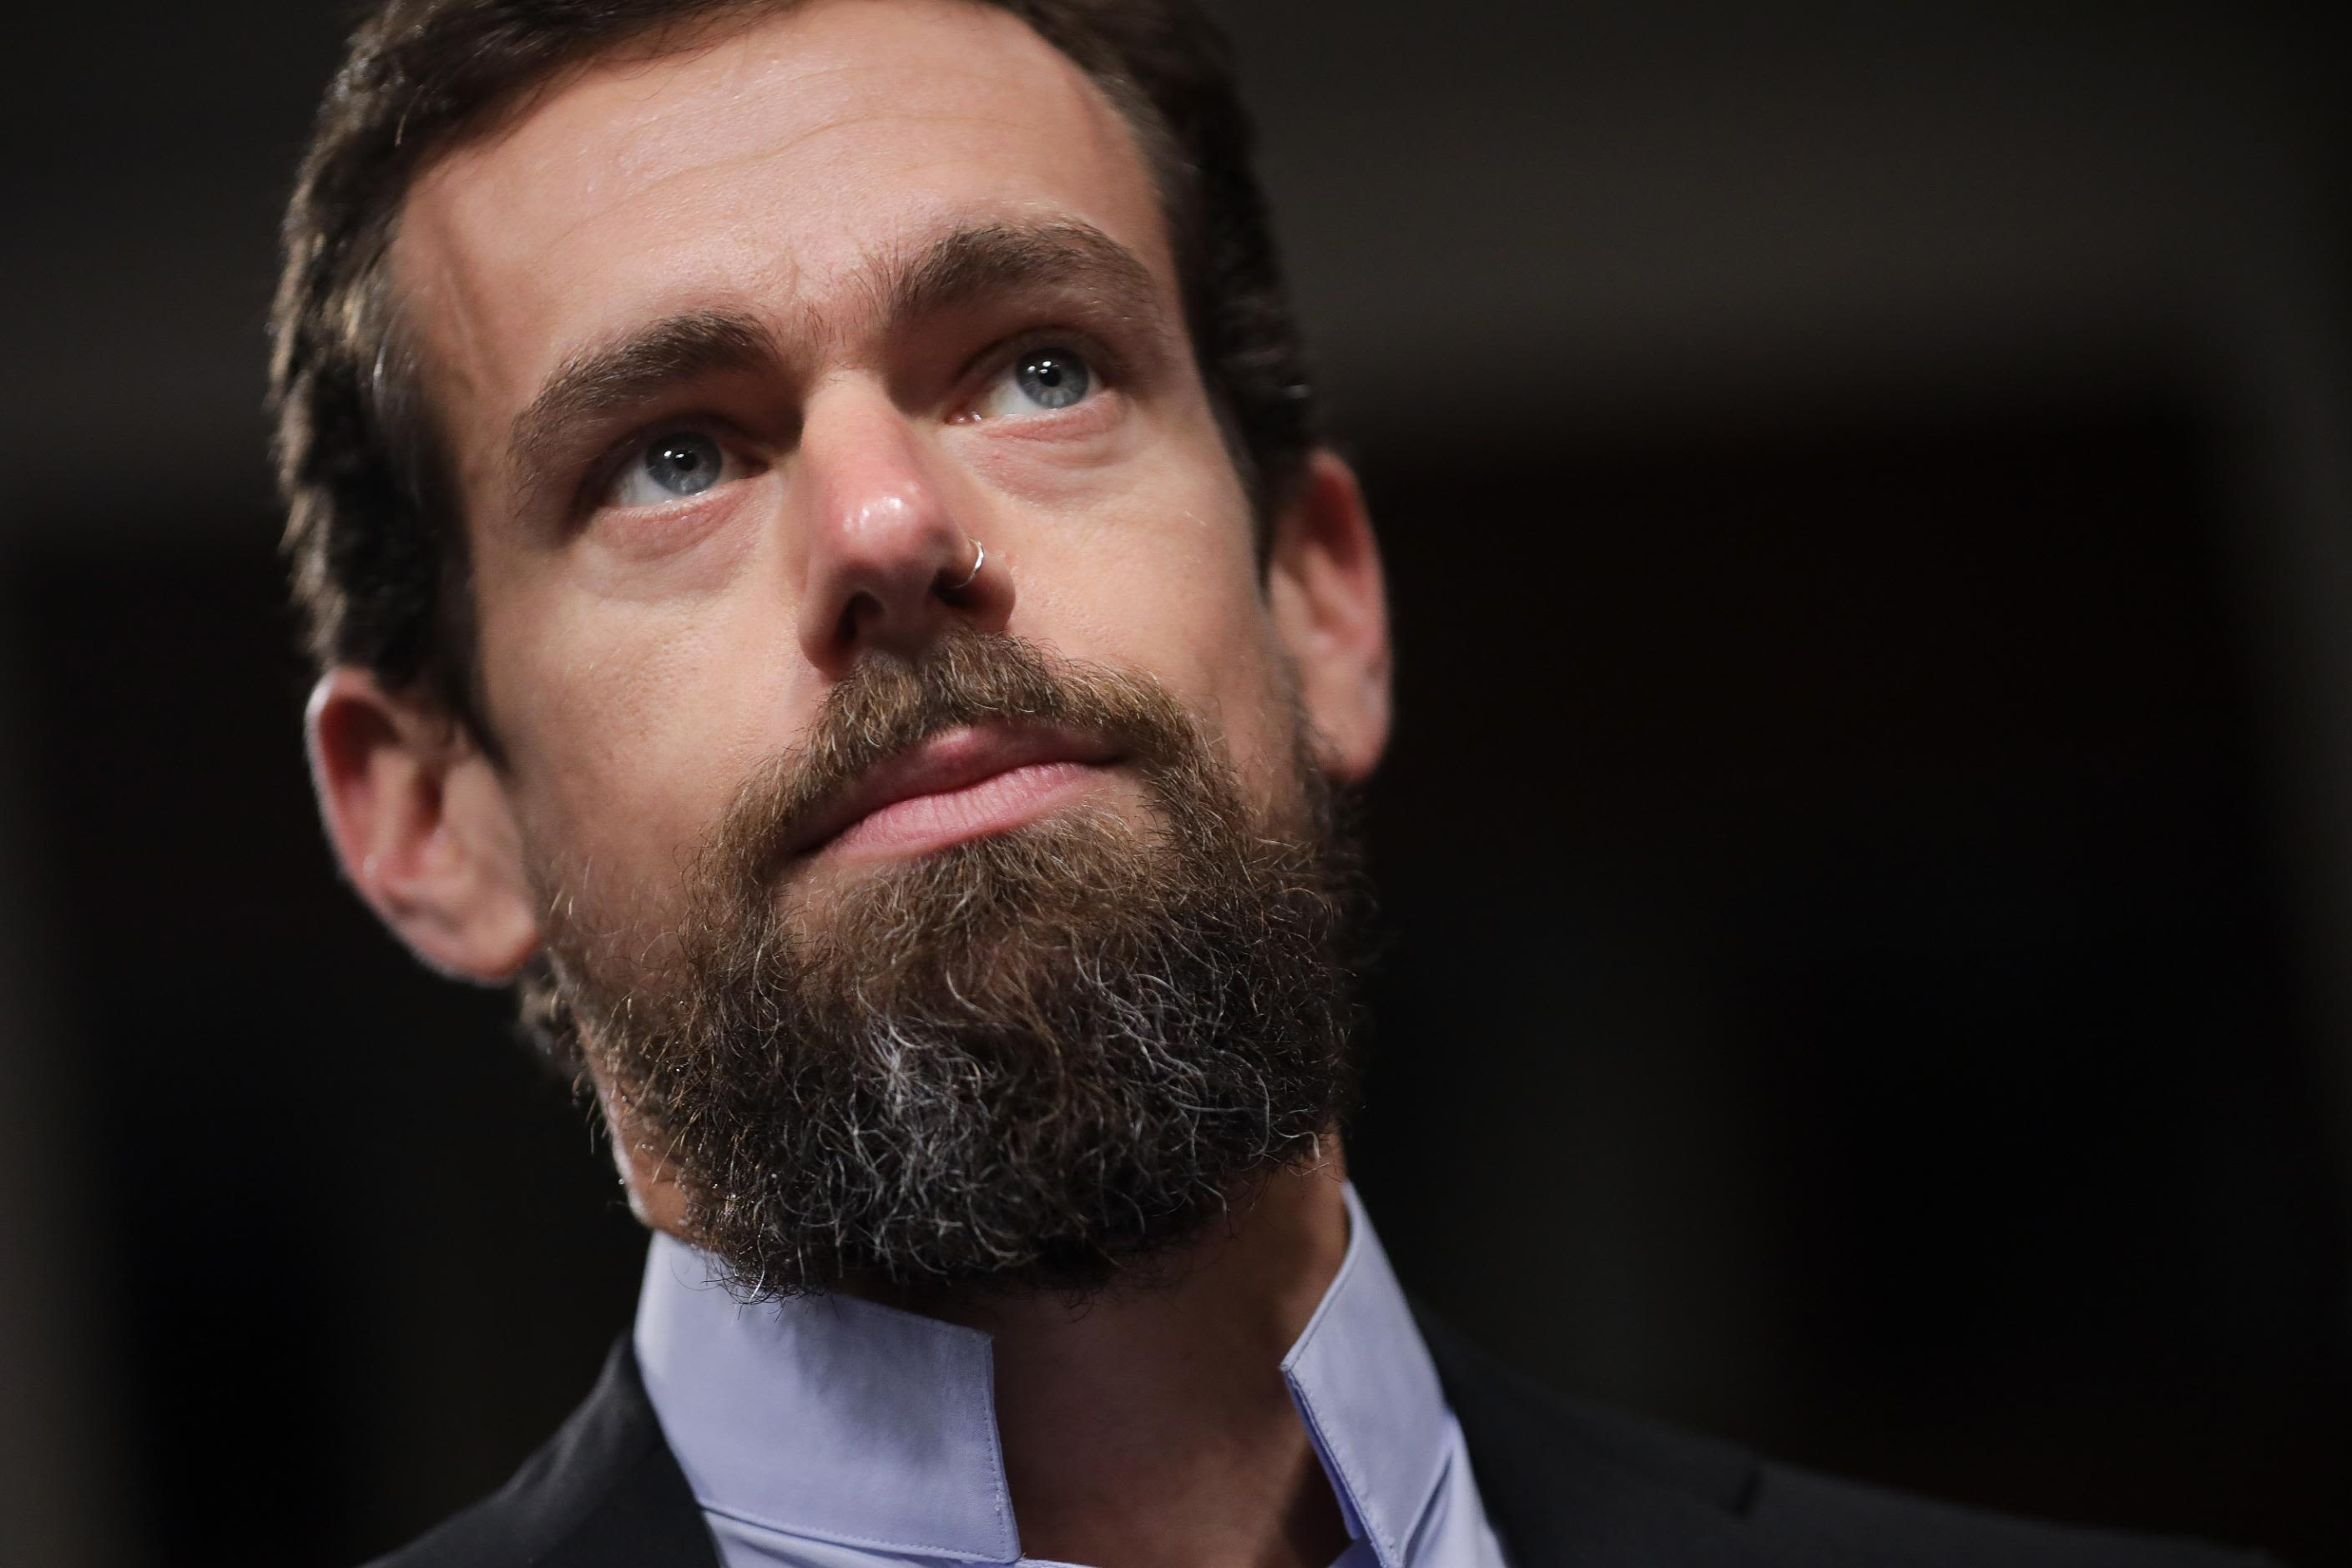 Twitter CEO Jack Dorsey Slammed For Tweet About Chick-Fil-A During Gay  Pride Month